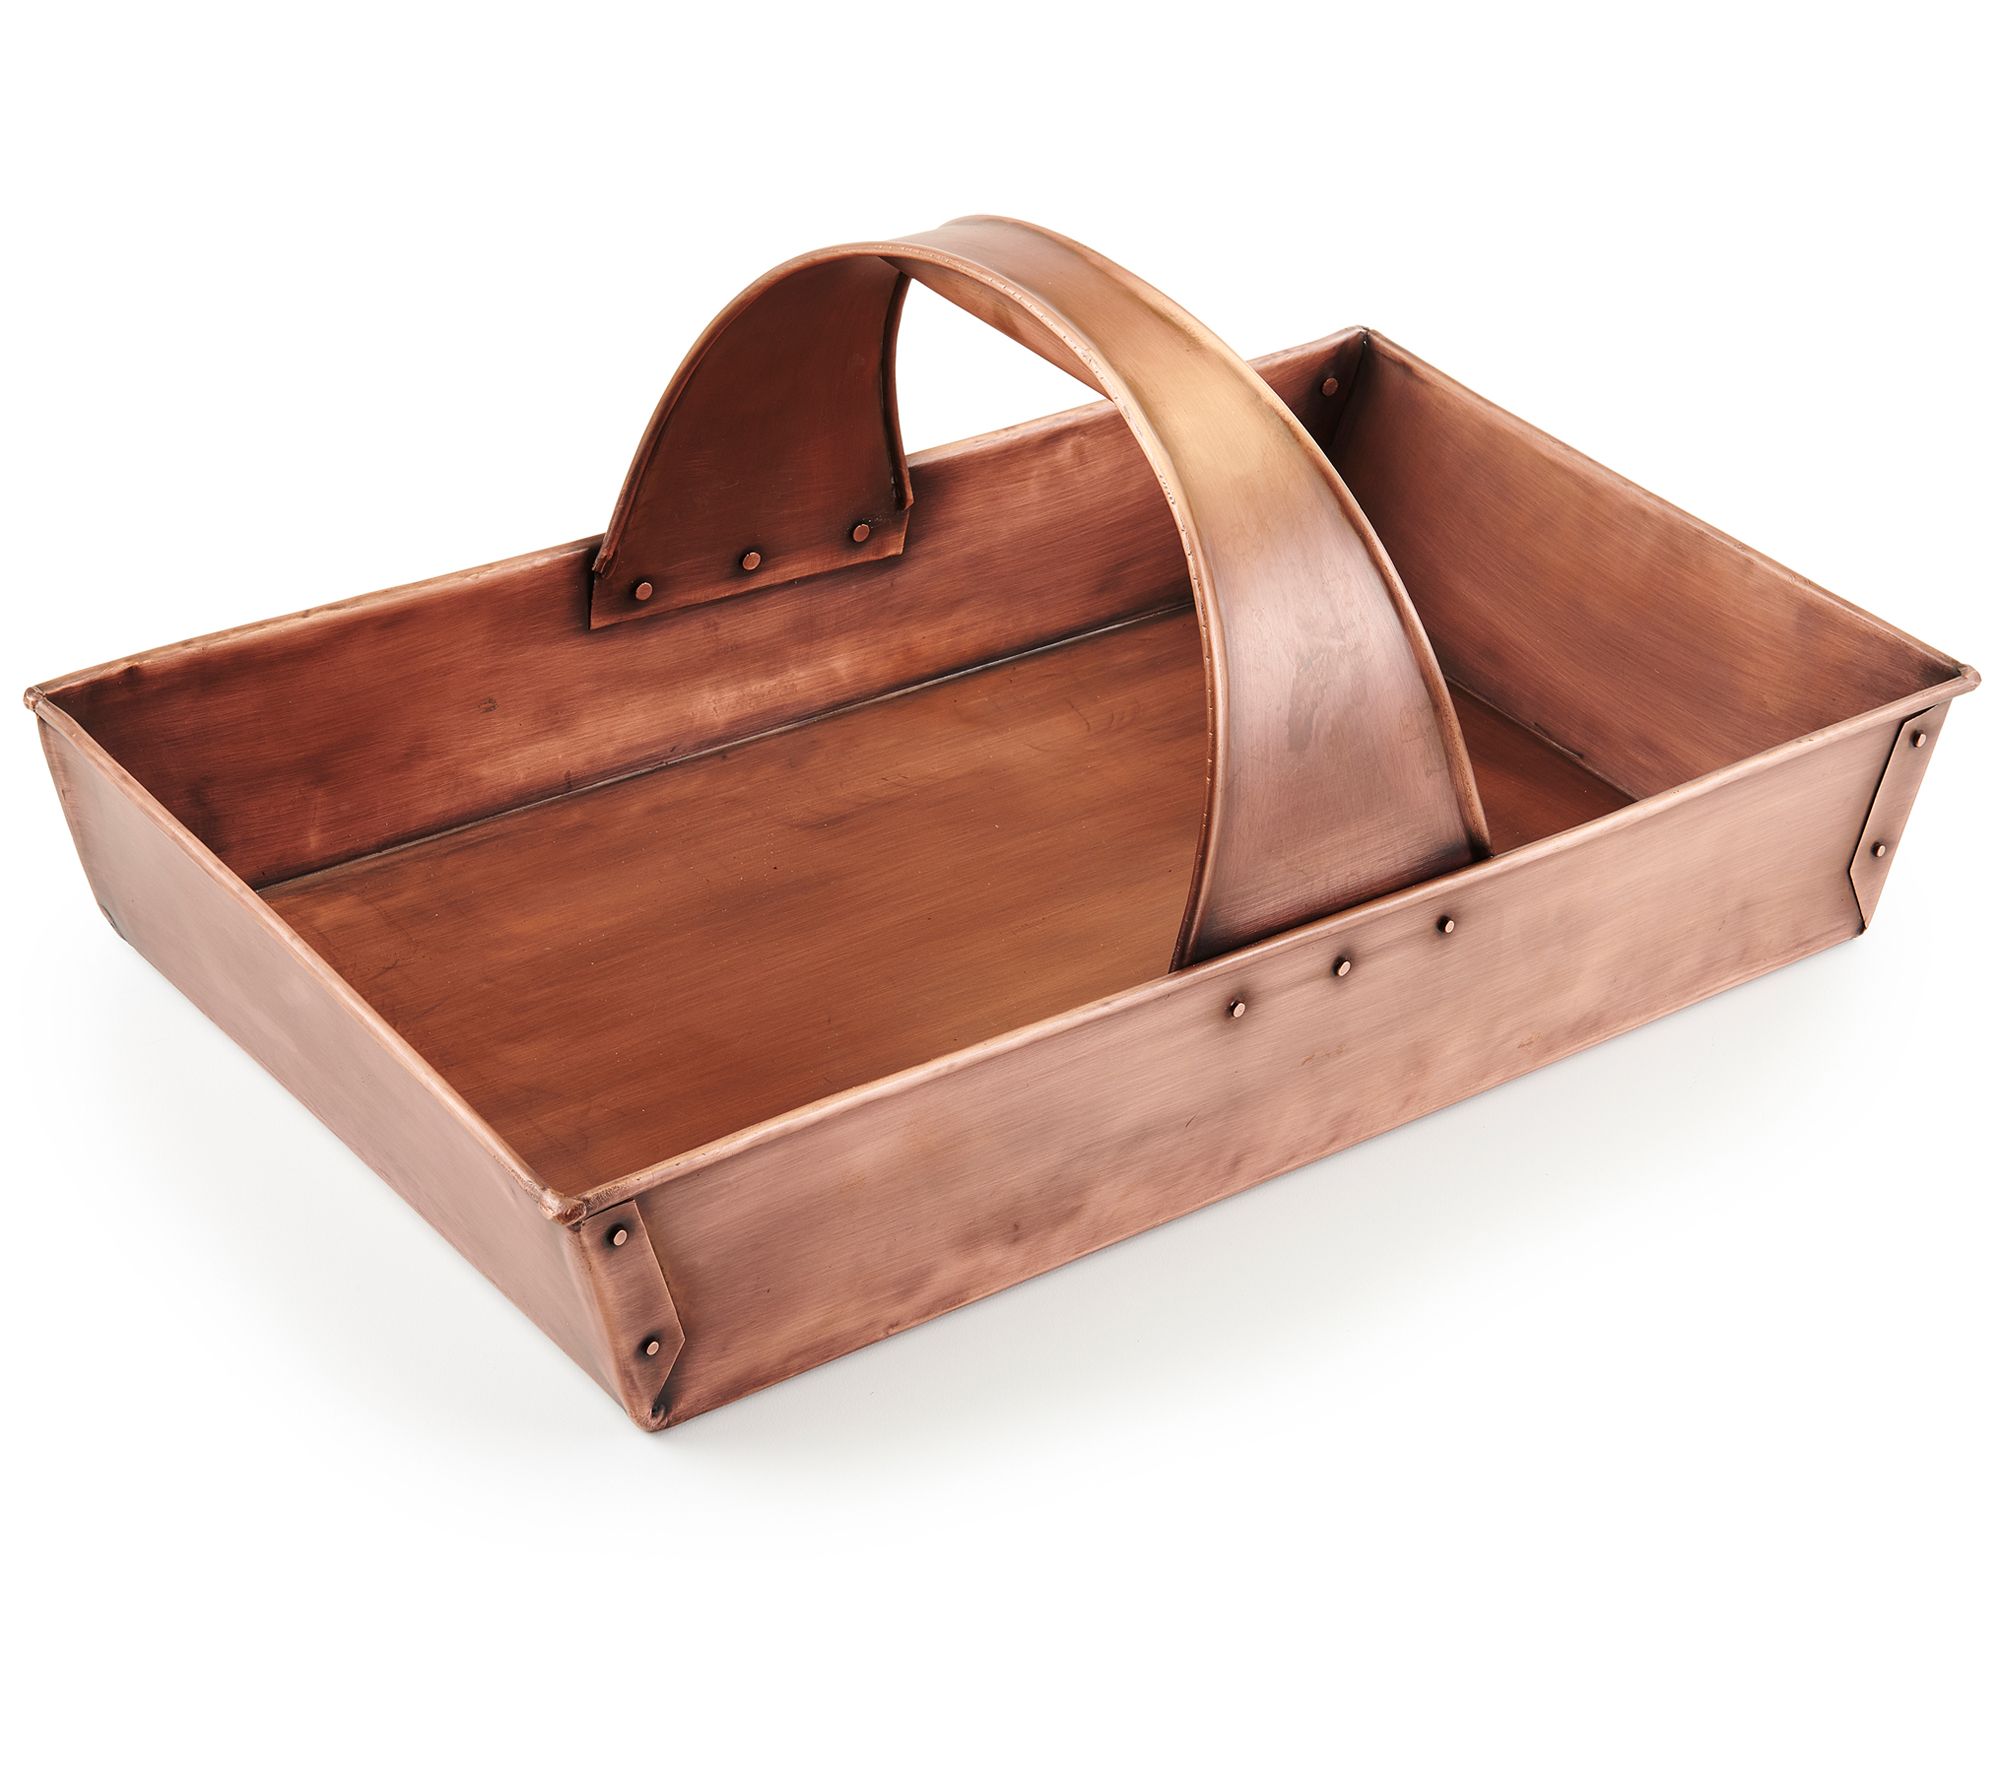 Large Pure Copper Garden Trug Basket by Good Directions, 1 of 5